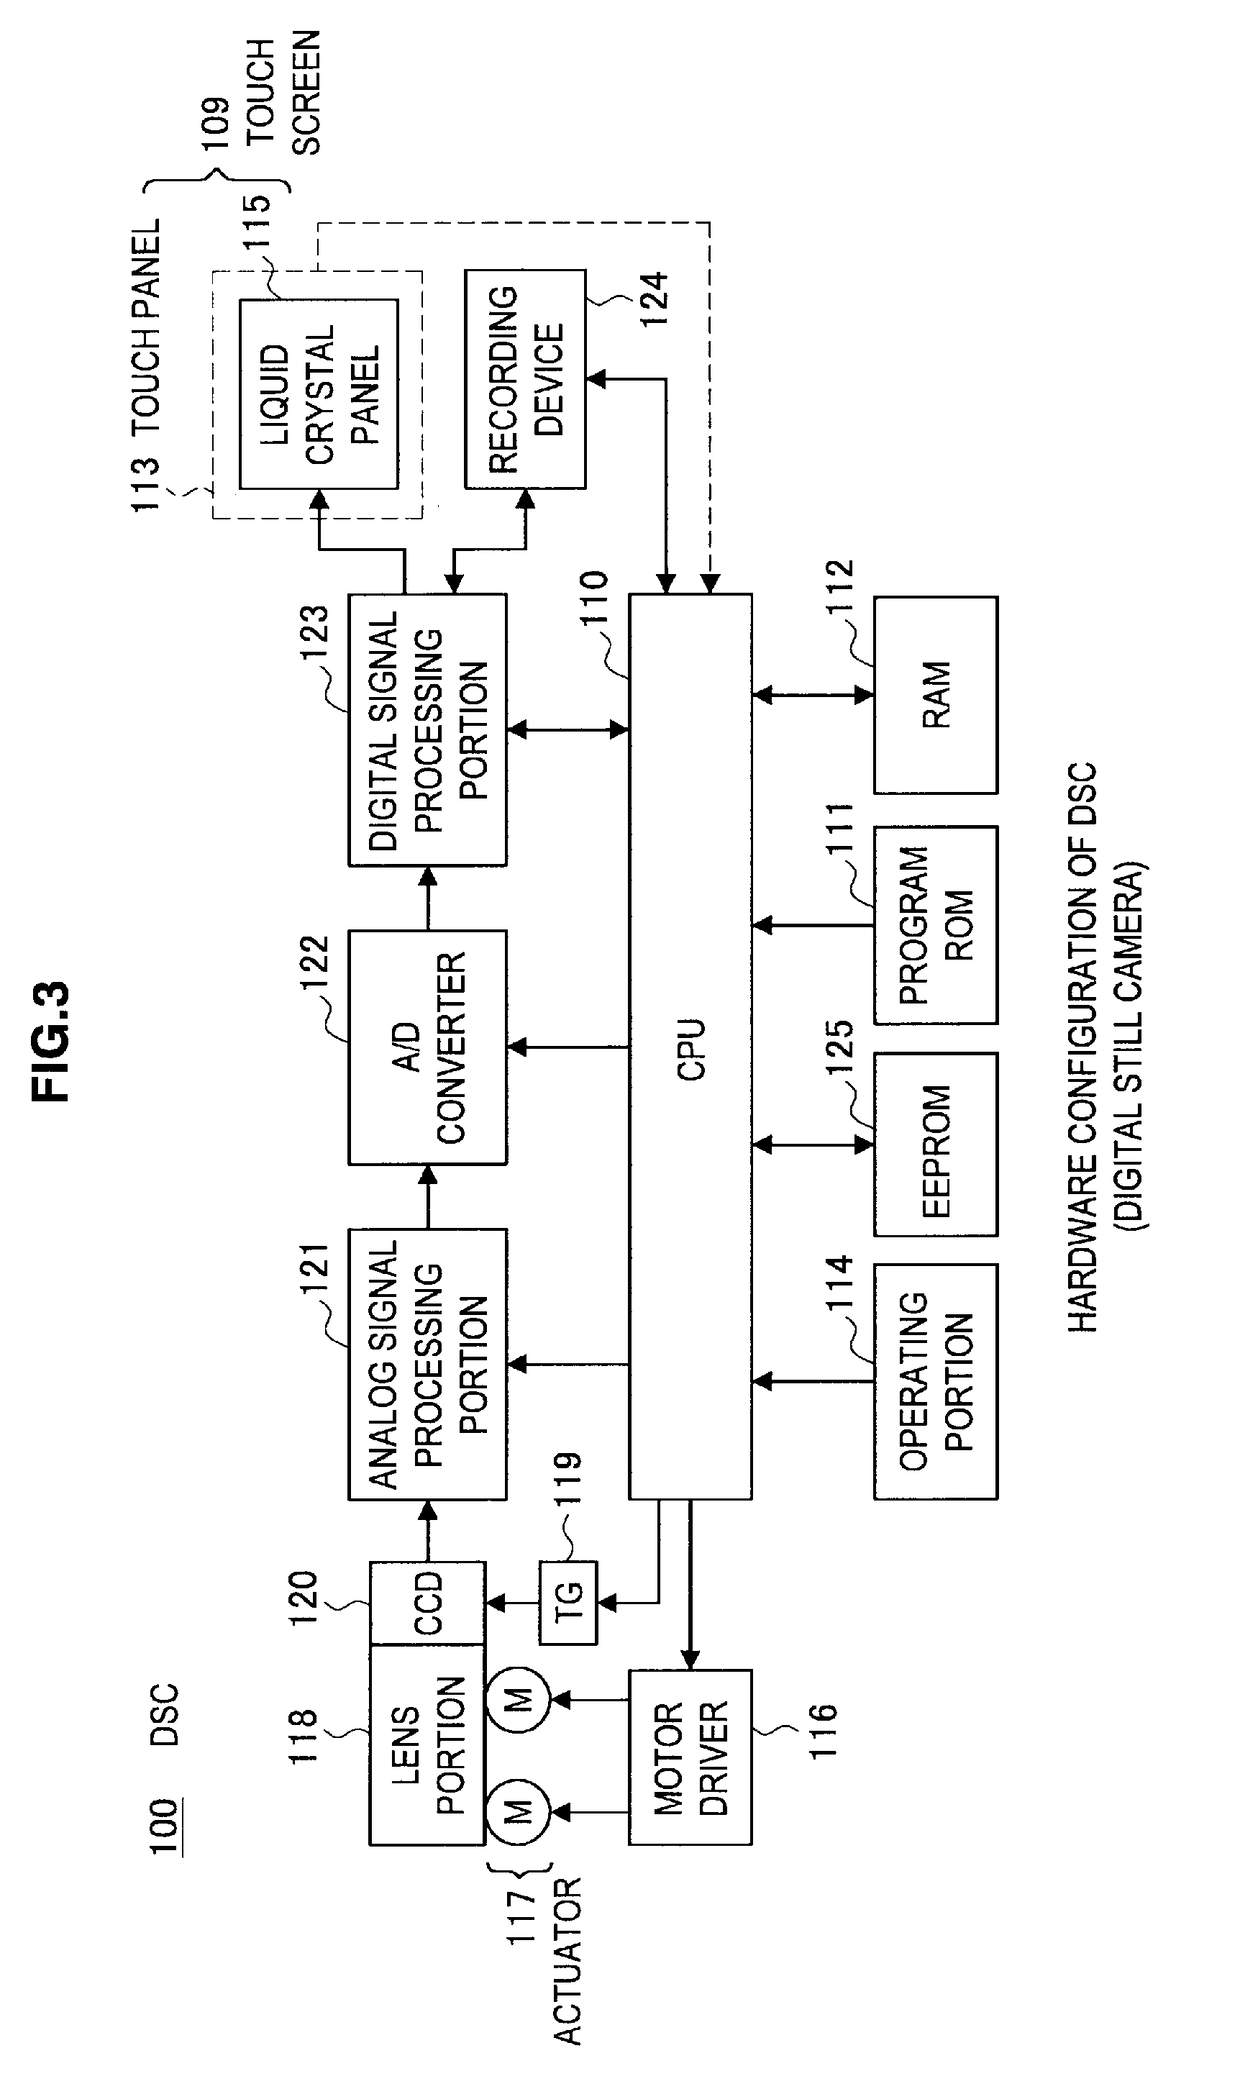 Digital image processing device and associated methodology of performing touch-based image scaling